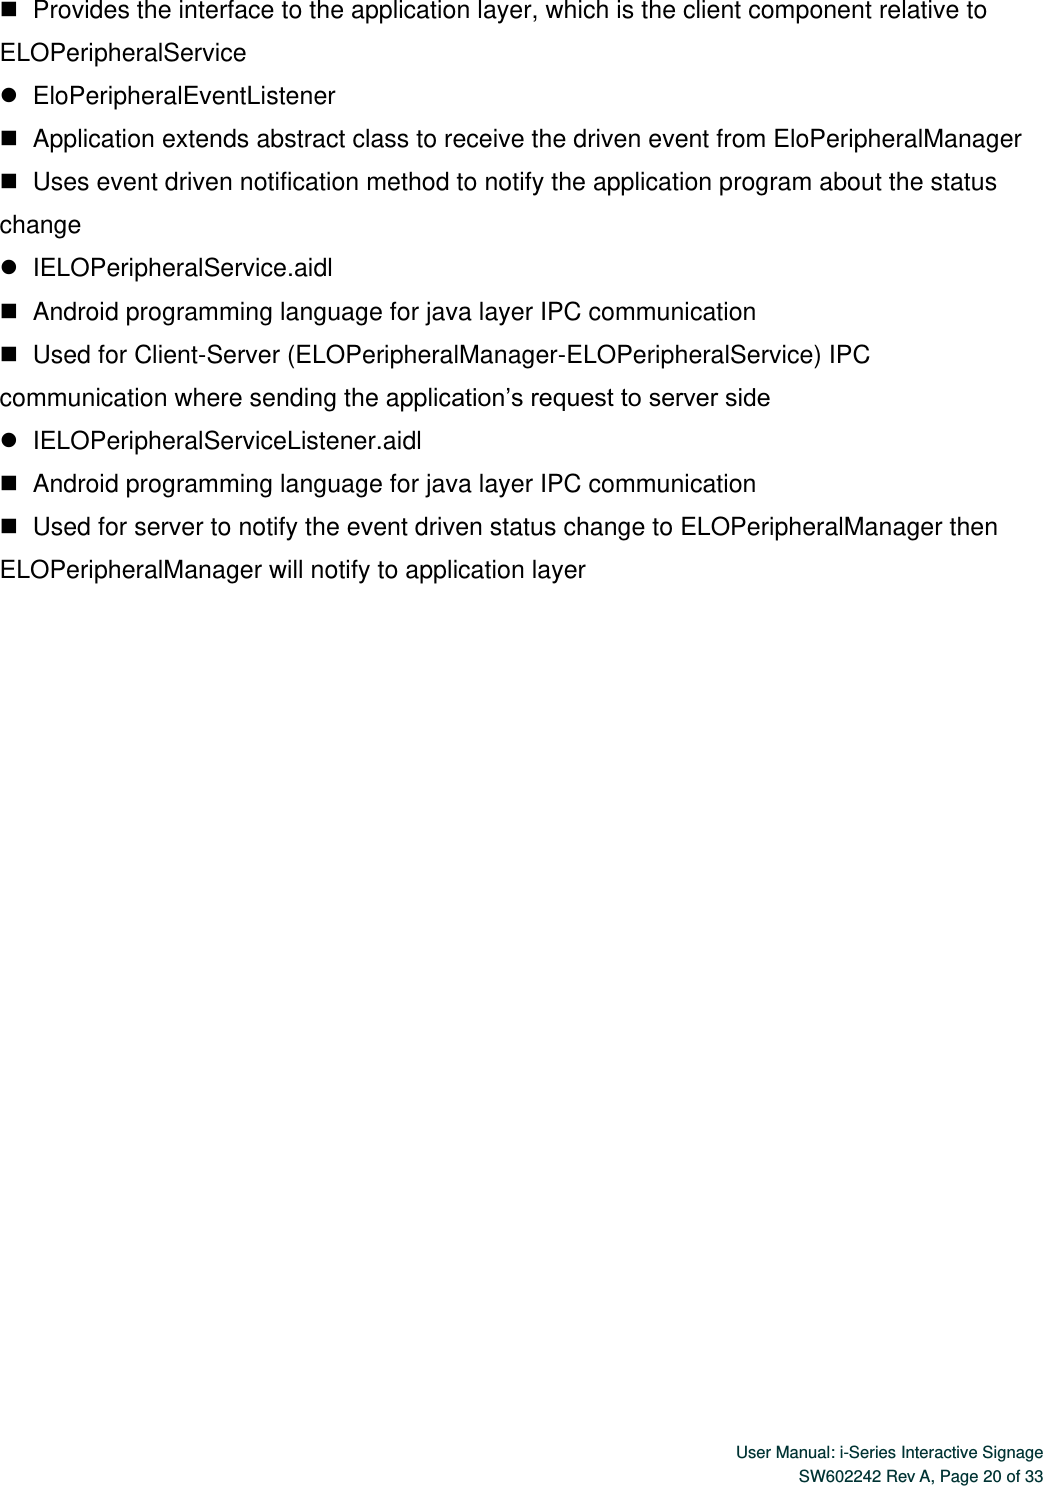  User Manual: i-Series Interactive Signage SW602242 Rev A, Page 20 of 33      Provides the interface to the application layer, which is the client component relative to ELOPeripheralService    EloPeripheralEventListener    Application extends abstract class to receive the driven event from EloPeripheralManager    Uses event driven notification method to notify the application program about the status change    IELOPeripheralService.aidl    Android programming language for java layer IPC communication    Used for Client-Server (ELOPeripheralManager-ELOPeripheralService) IPC communication where sending the application’s request to server side    IELOPeripheralServiceListener.aidl    Android programming language for java layer IPC communication    Used for server to notify the event driven status change to ELOPeripheralManager then ELOPeripheralManager will notify to application layer 